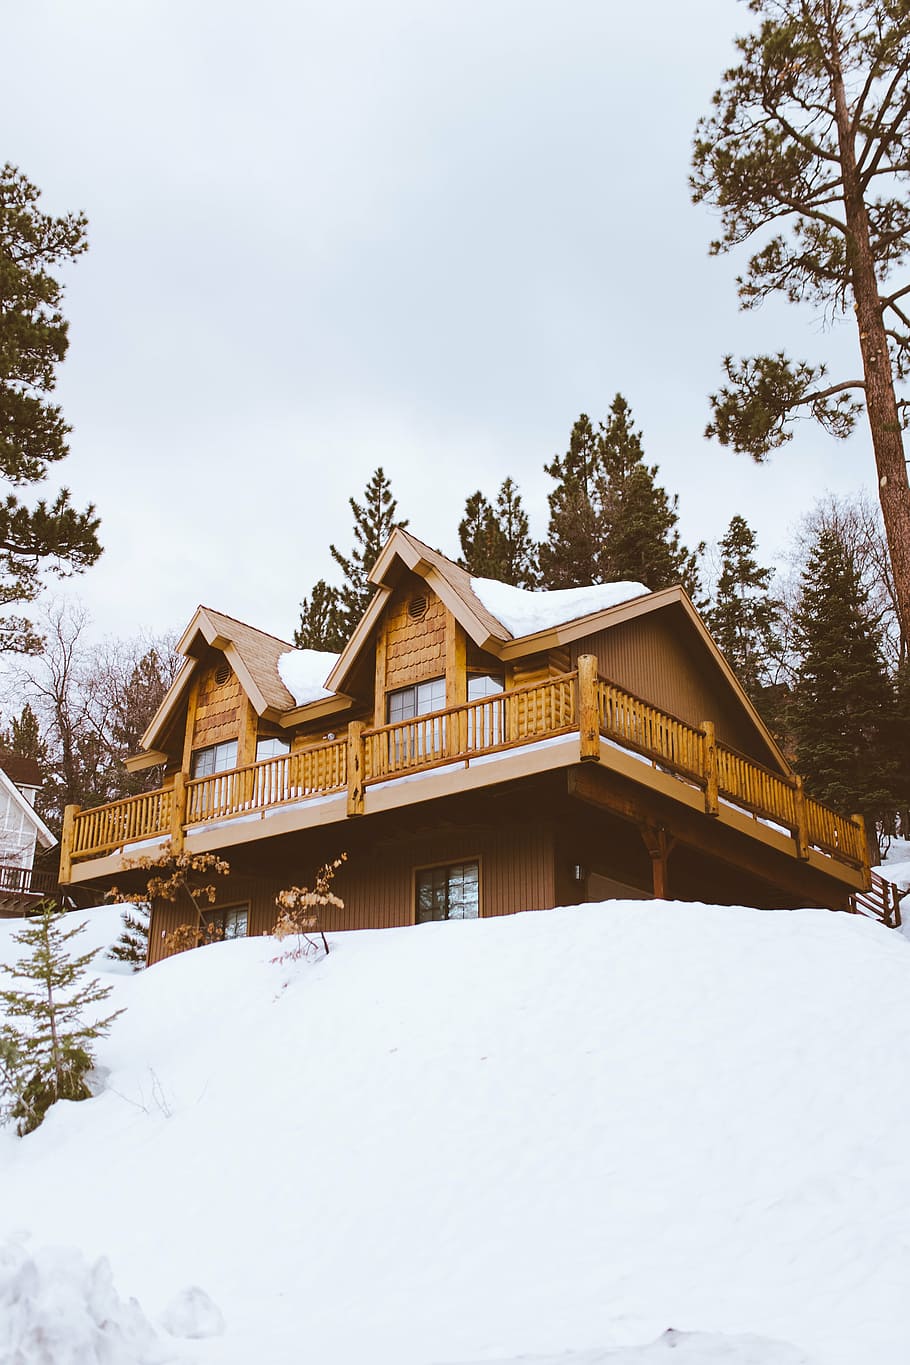 brown, black, wooden, house, covered, snow, winter, white, cold, weather